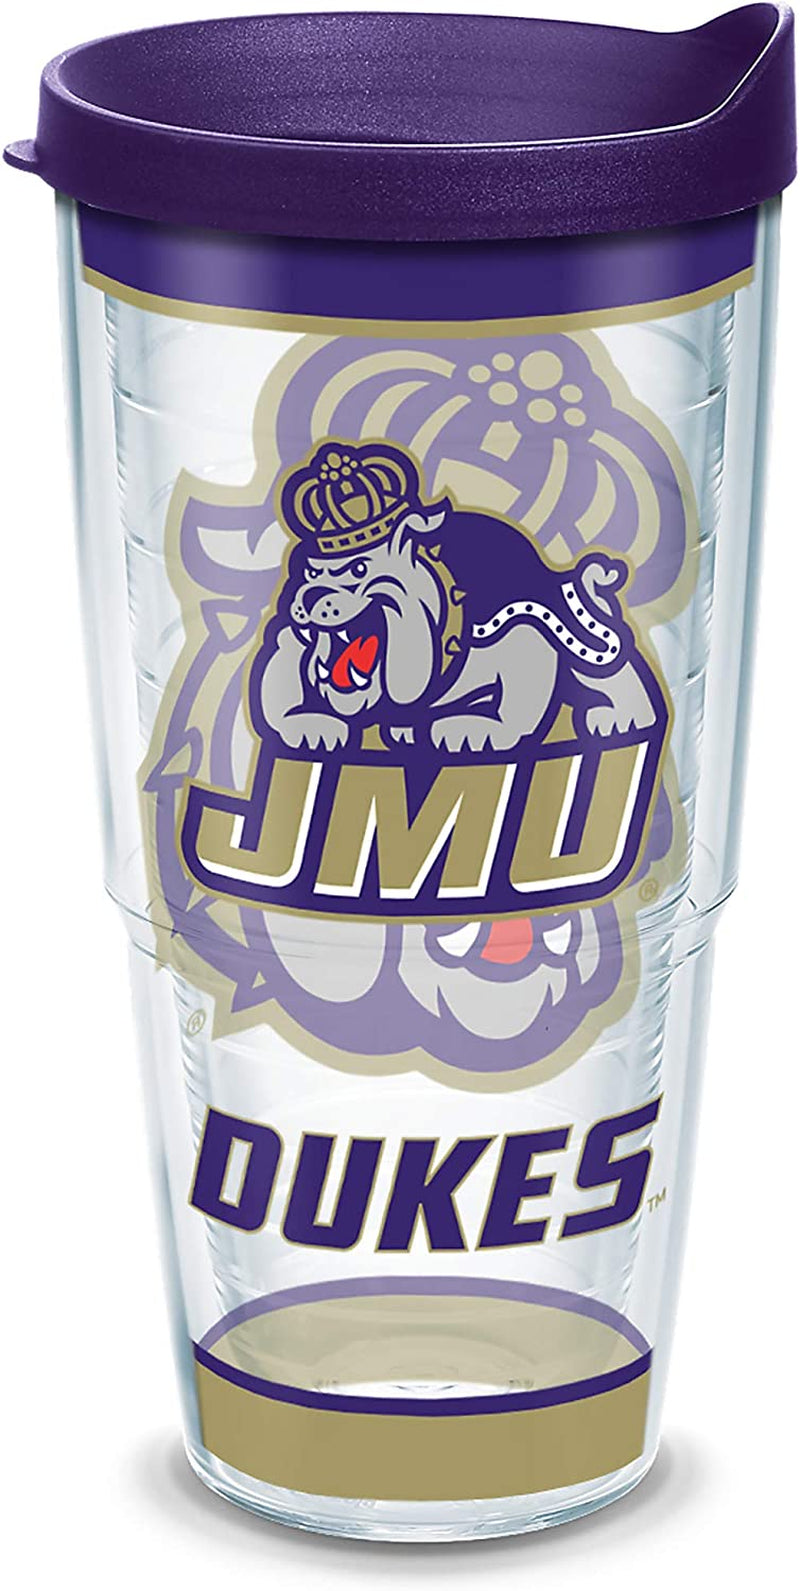 Tervis Made in USA Double Walled James Madison University JMU Dukes Insulated Tumbler Cup Keeps Drinks Cold & Hot, 24Oz - Black Lid, Primary Logo Home & Garden > Kitchen & Dining > Tableware > Drinkware Tervis Tradition 24oz 